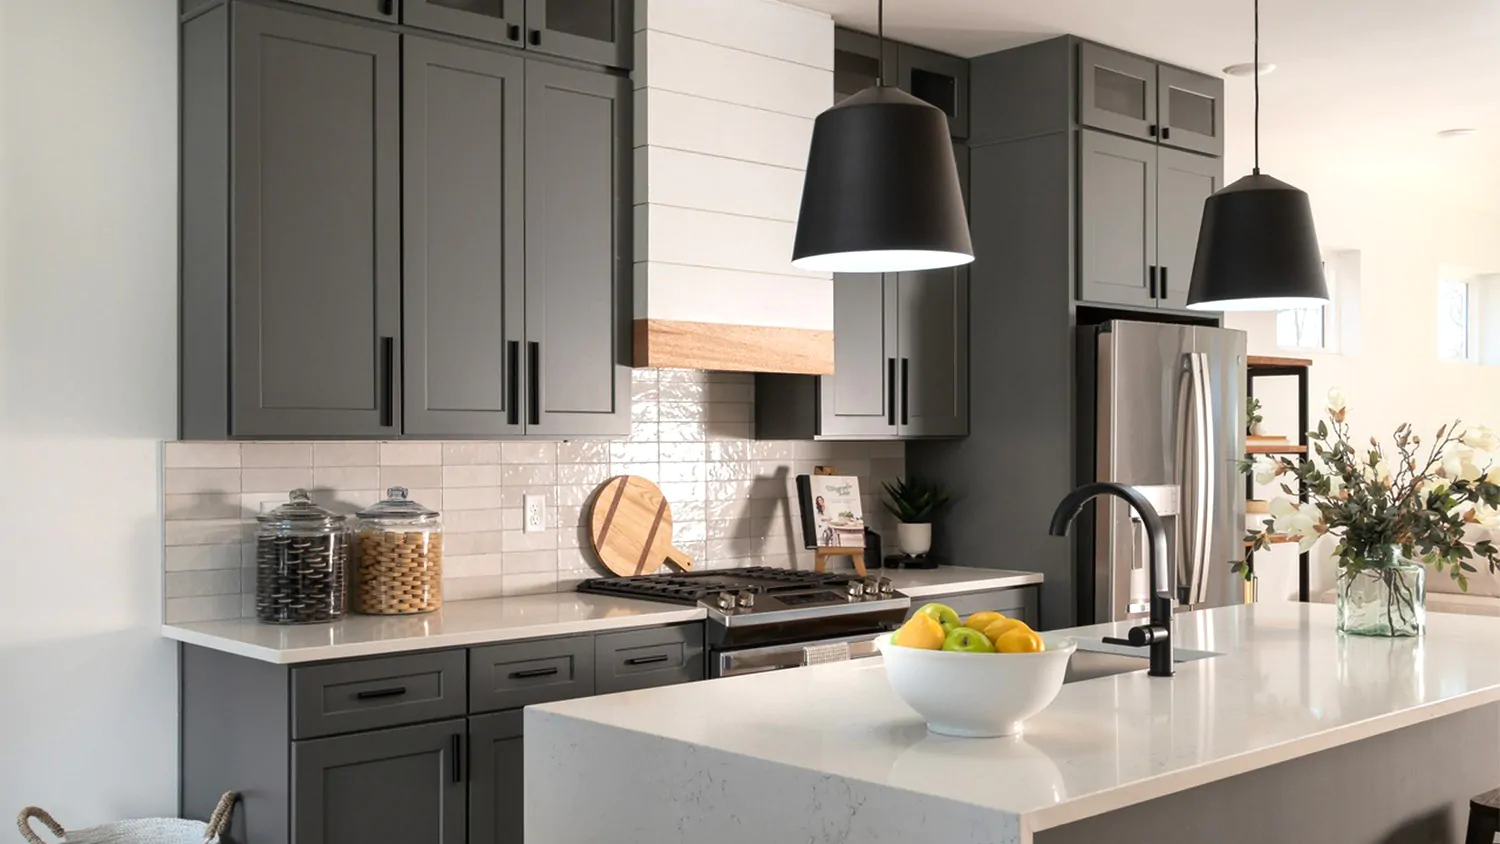 Our cabinets: Oxford Gray